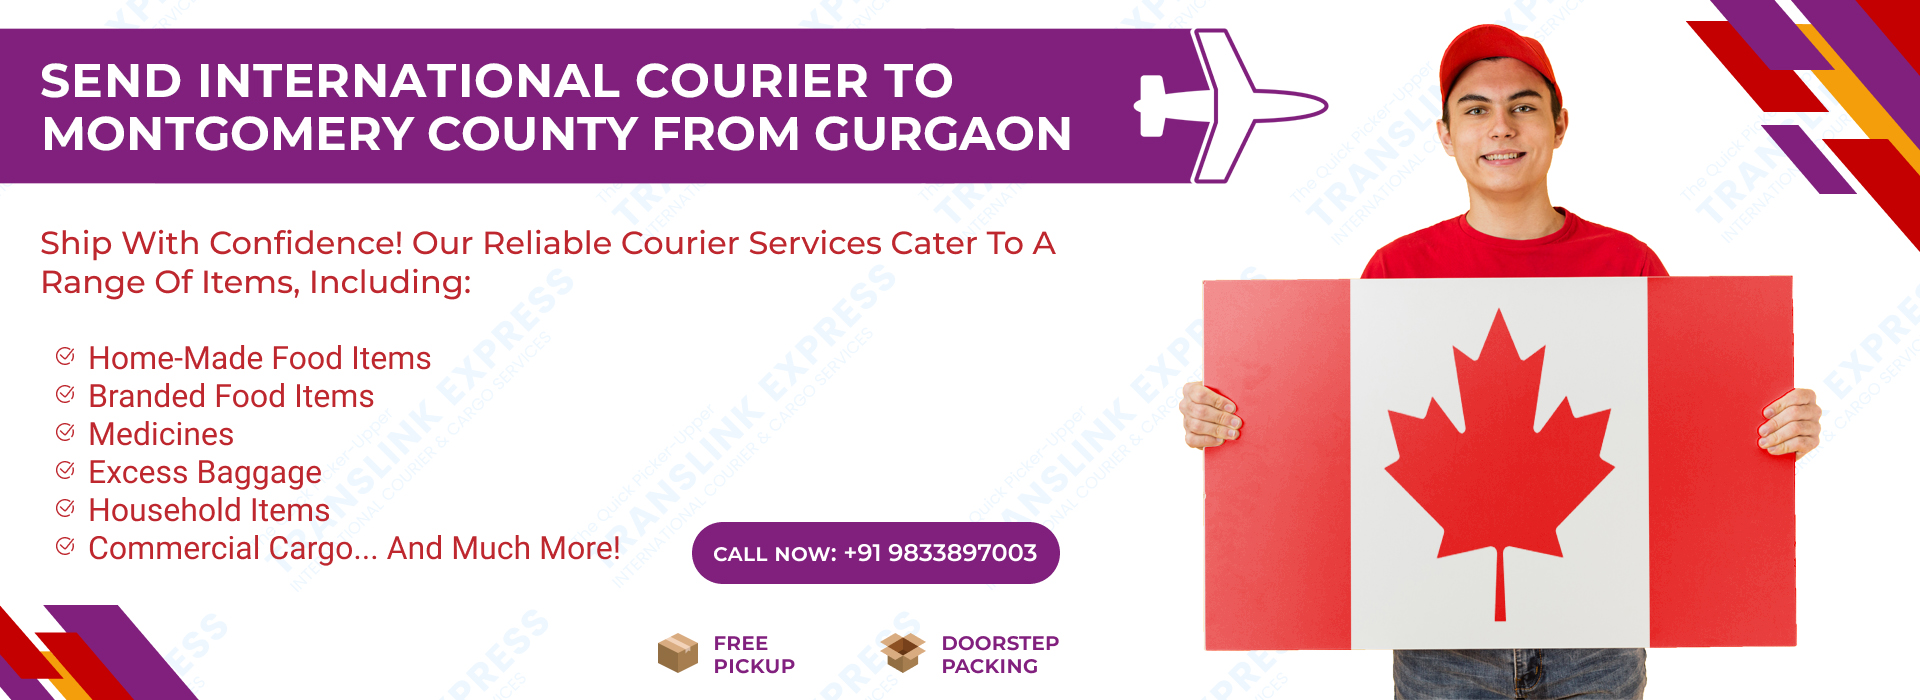 Courier to Montgomery County From Gurgaon